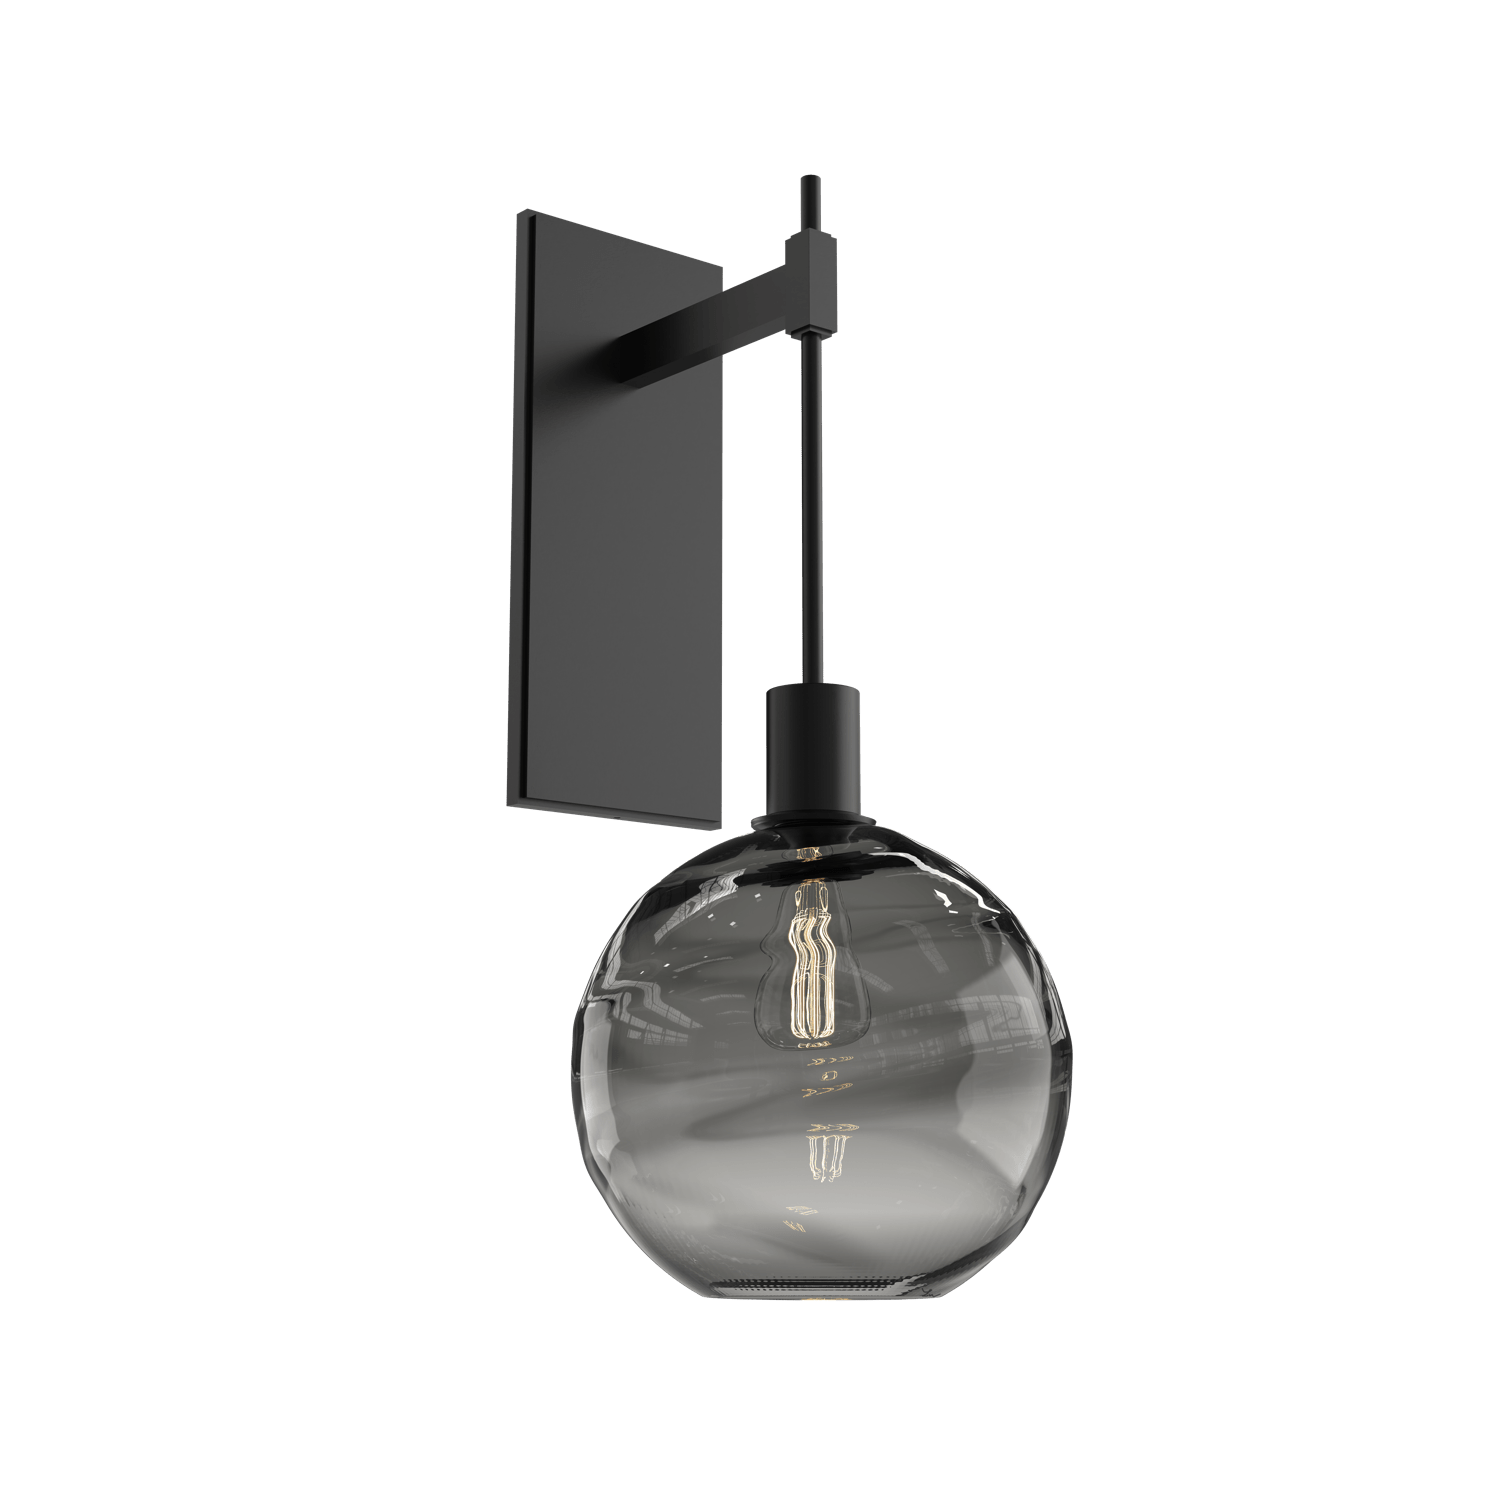 IDB0047-22-MB-OS-Hammerton-Studio-Optic-Blown-Glass-Terra-tempo-wall-sconce-with-matte-black-finish-and-optic-smoke-blown-glass-shades-and-incandescent-lamping